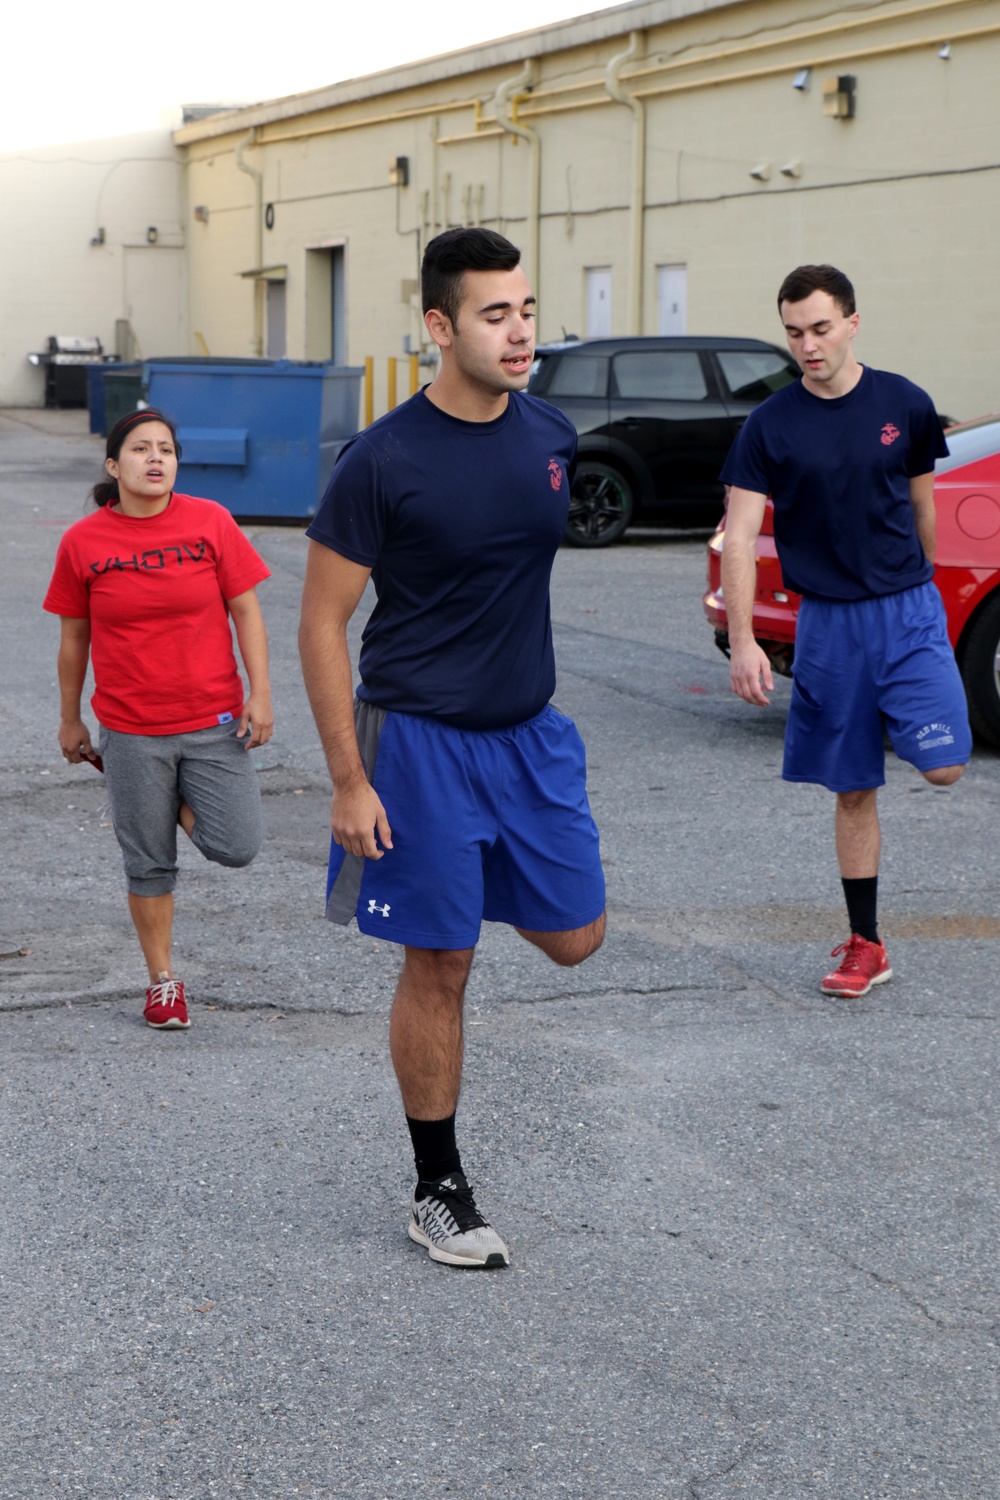 Severna Park High School Graduate shaves weight to Enlist